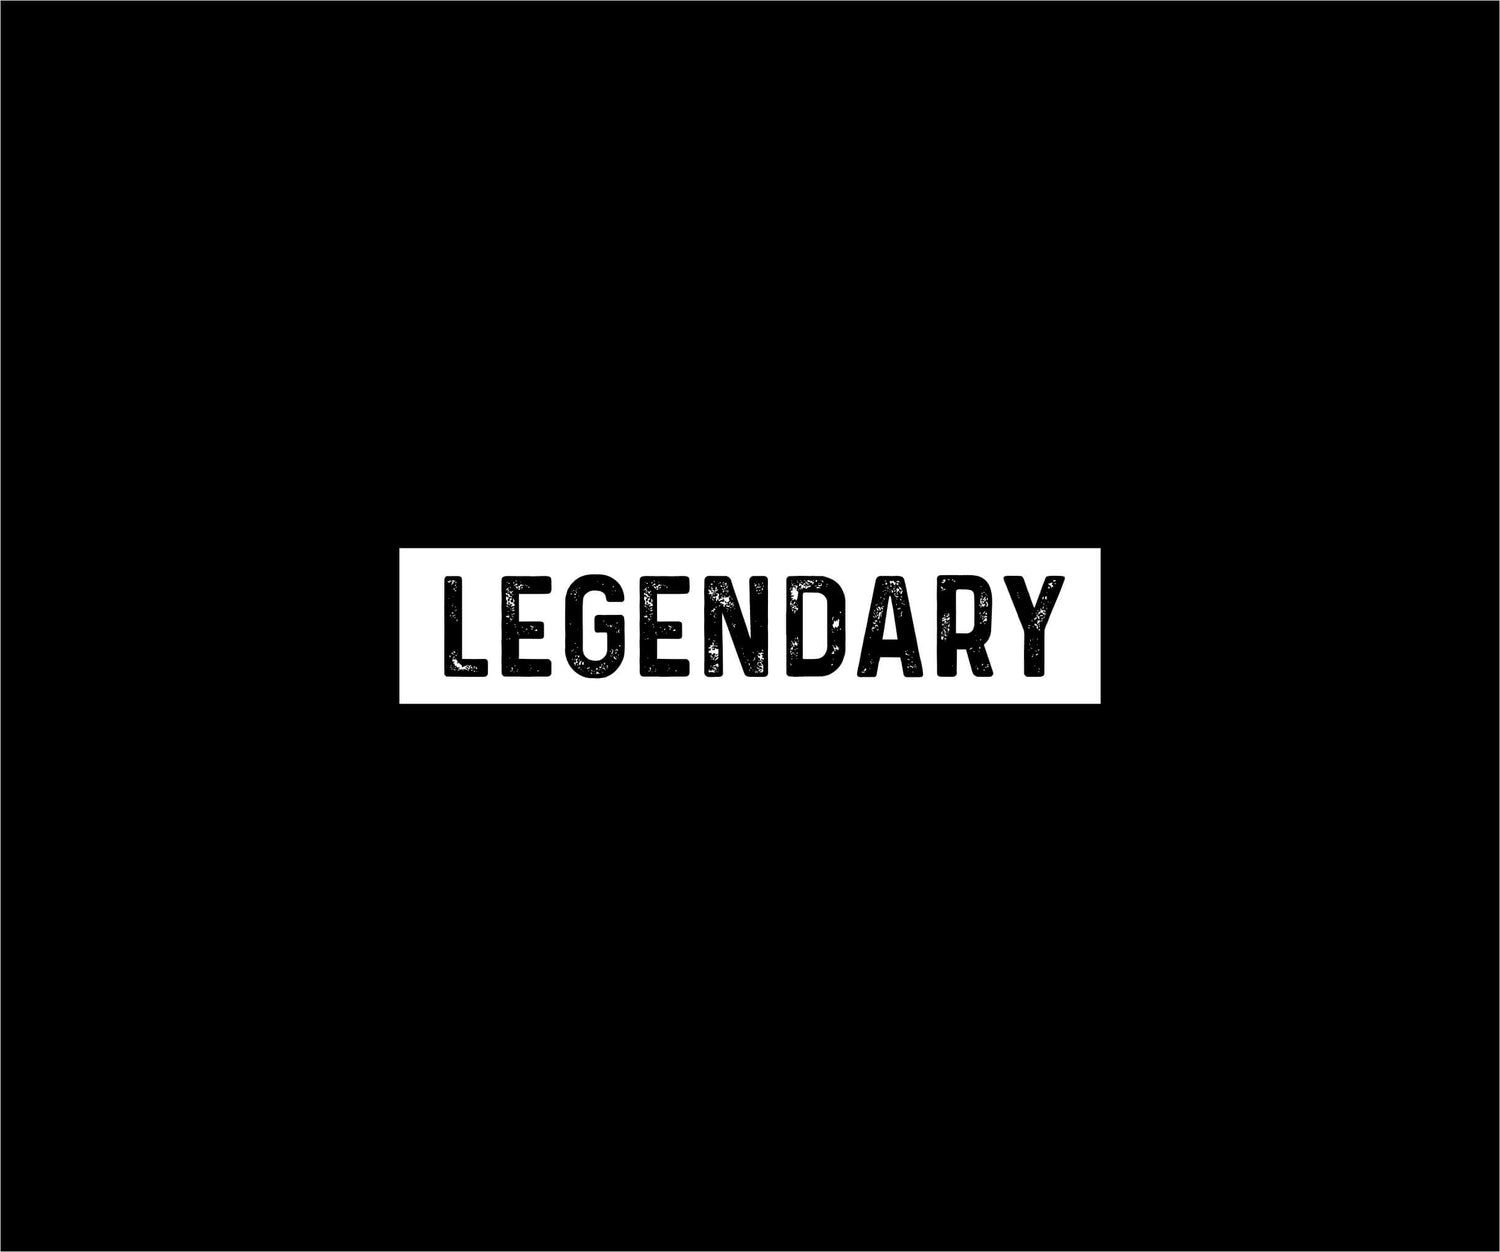 WANT TO BE LEGENDARY? - Chaos and Pain